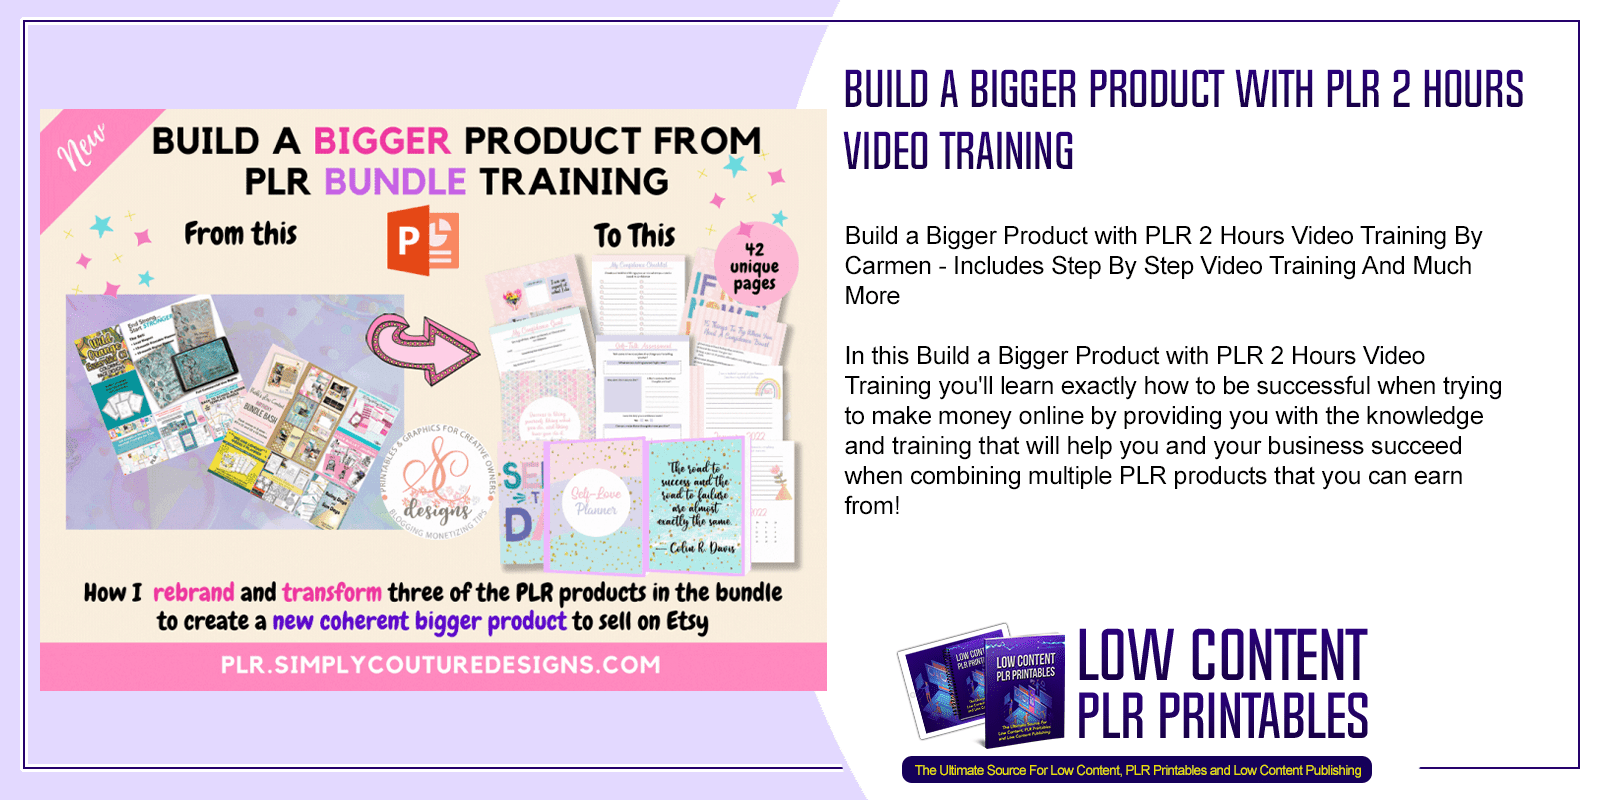 Build a Bigger Product with PLR 2 Hours Video Training